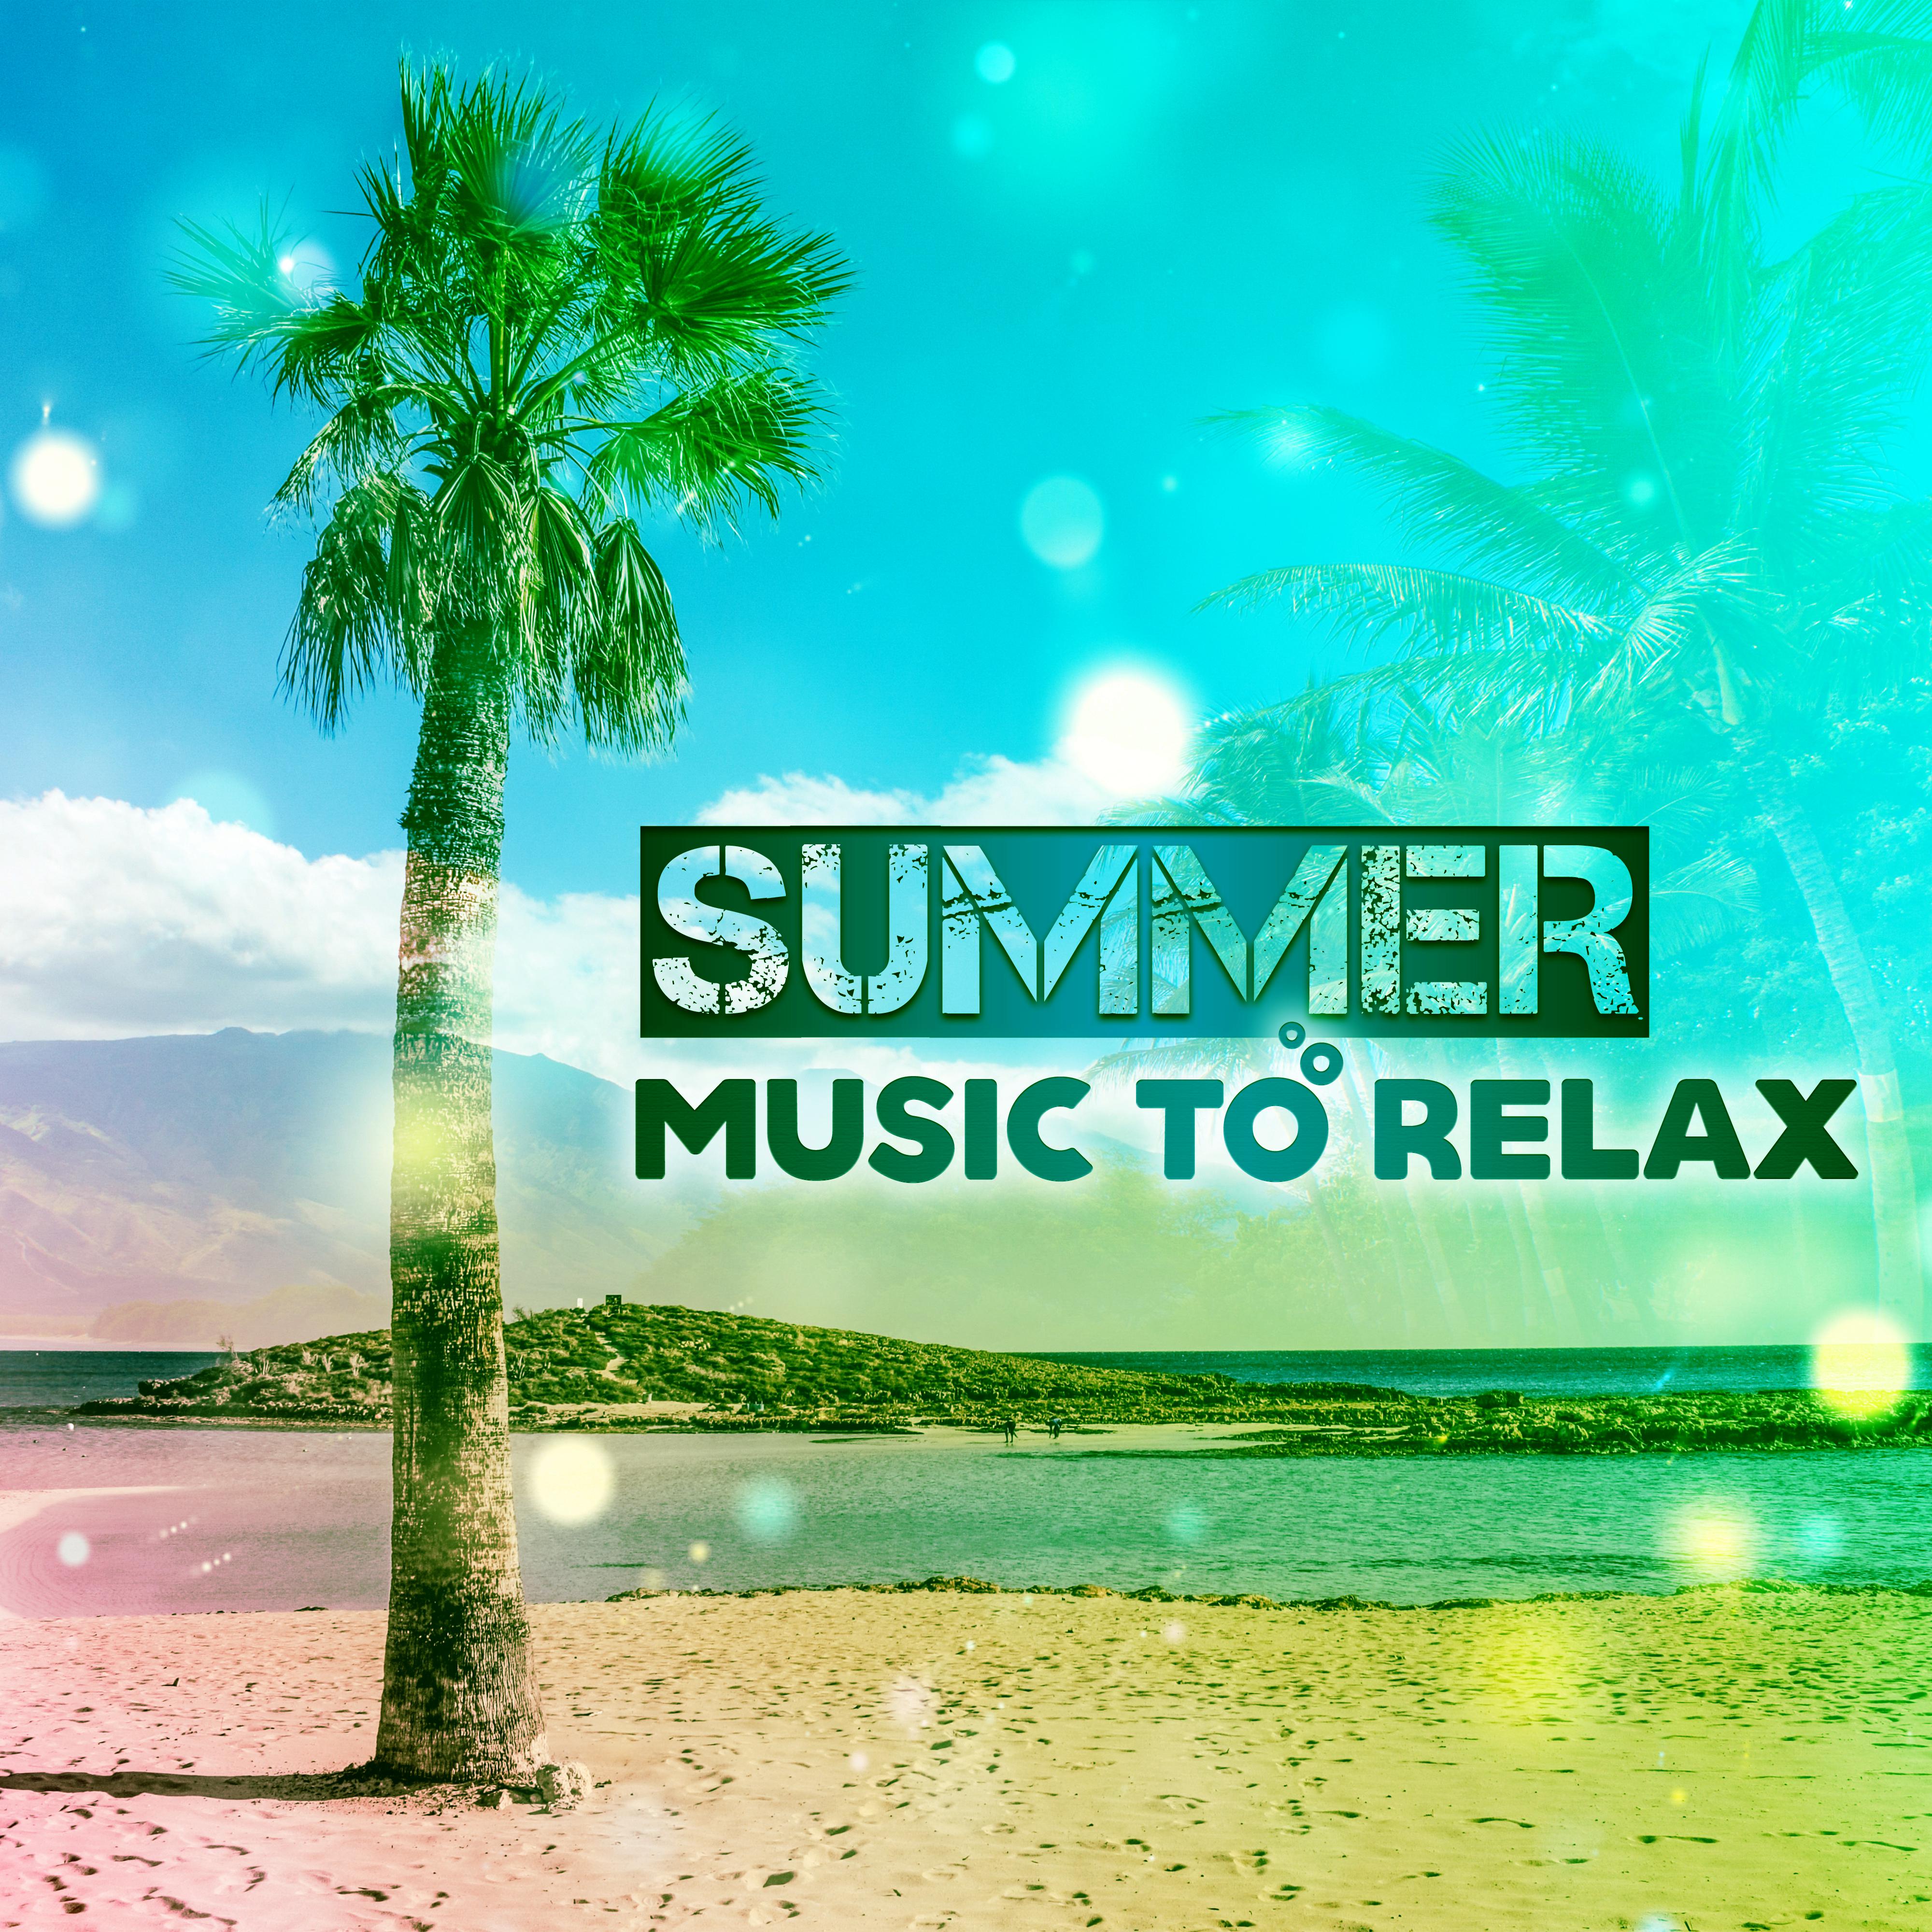 Summer Music to Relax – Stress Relief, Chill Out Music, Soft Sounds to Rest, Calm Down